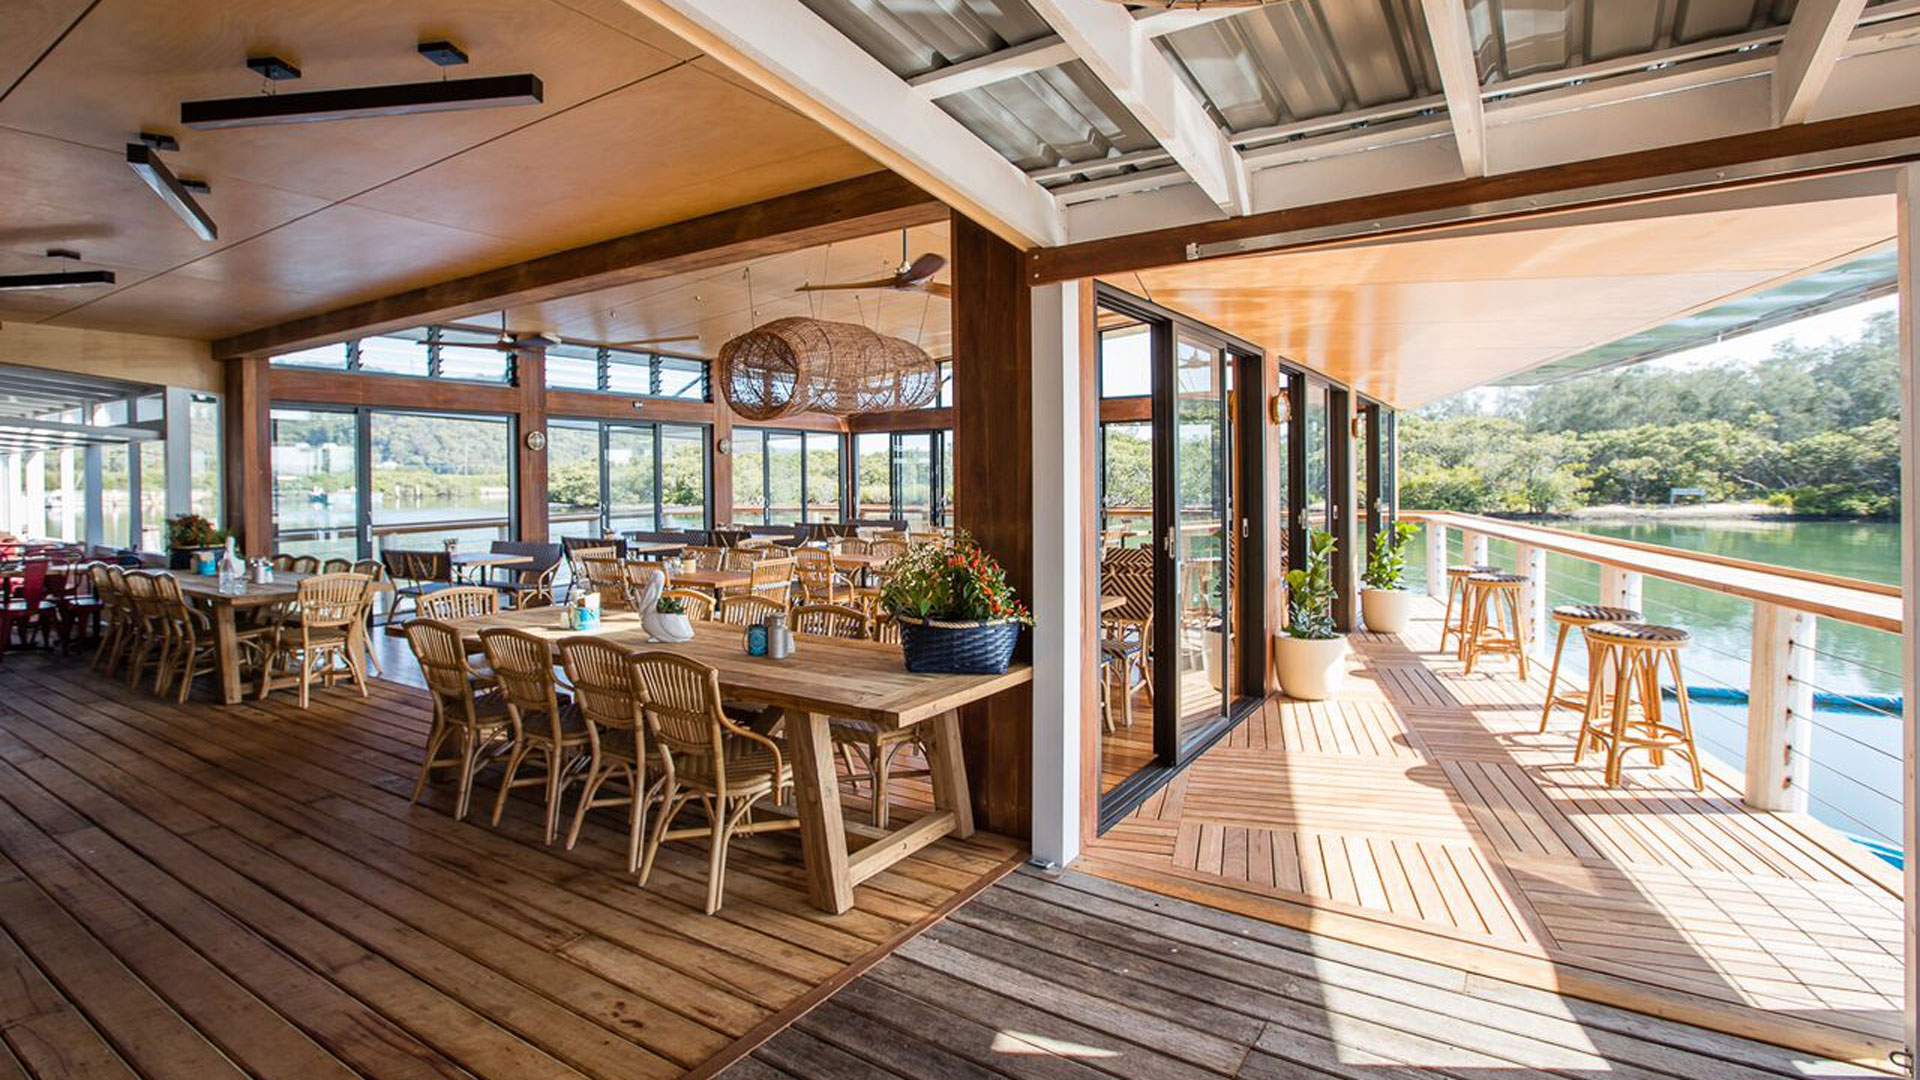 Woy Woy Fishermen's Wharf's Revamped Restaurant Is Your New Excuse to Head Out of the City